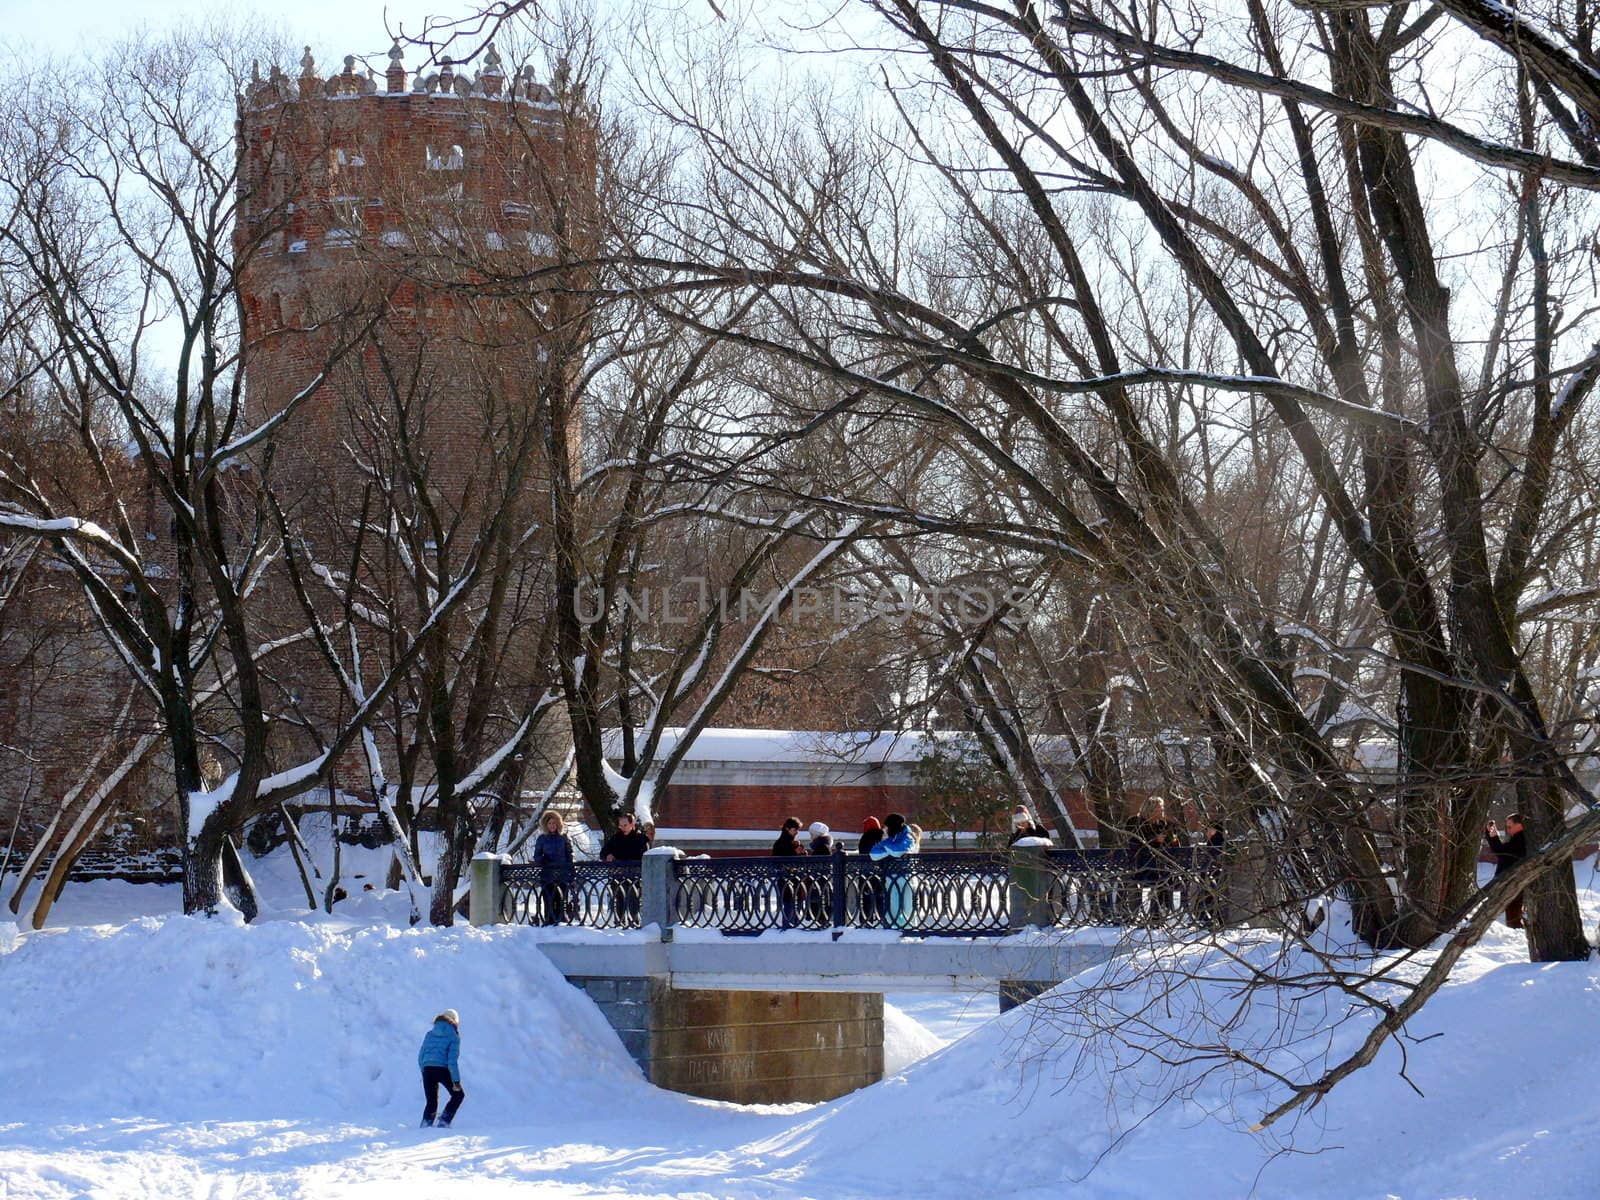 Moscow, Russia - February 23, 2010: Winter day. Peoples walks near fort in Novodevichiy monastery in Moscow, Russia